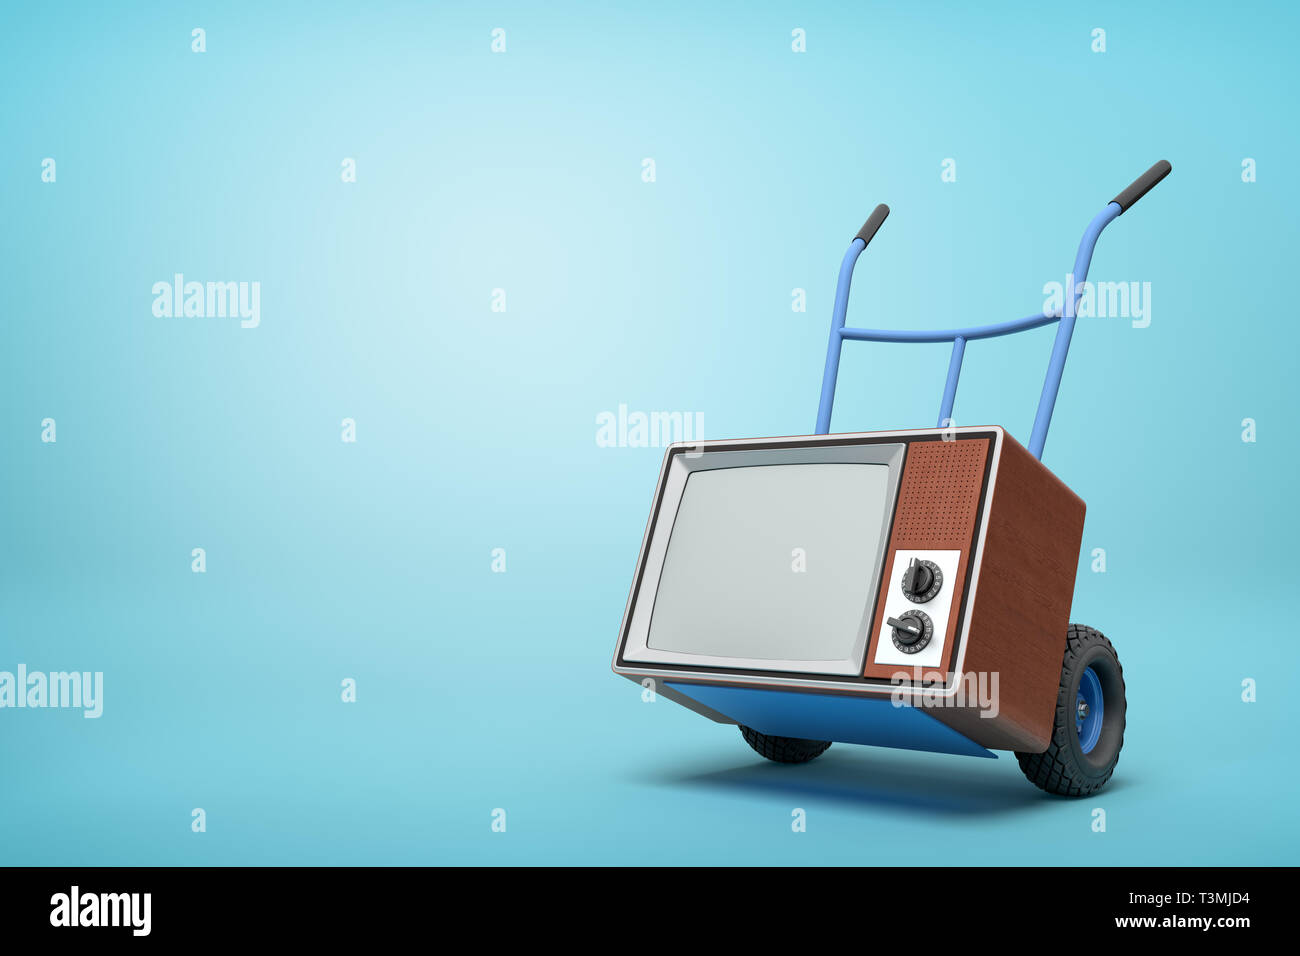 3d rendering of blue hand truck standing in half-turn with brown retro TV set on it on light-blue background with copy space. Stock Photo